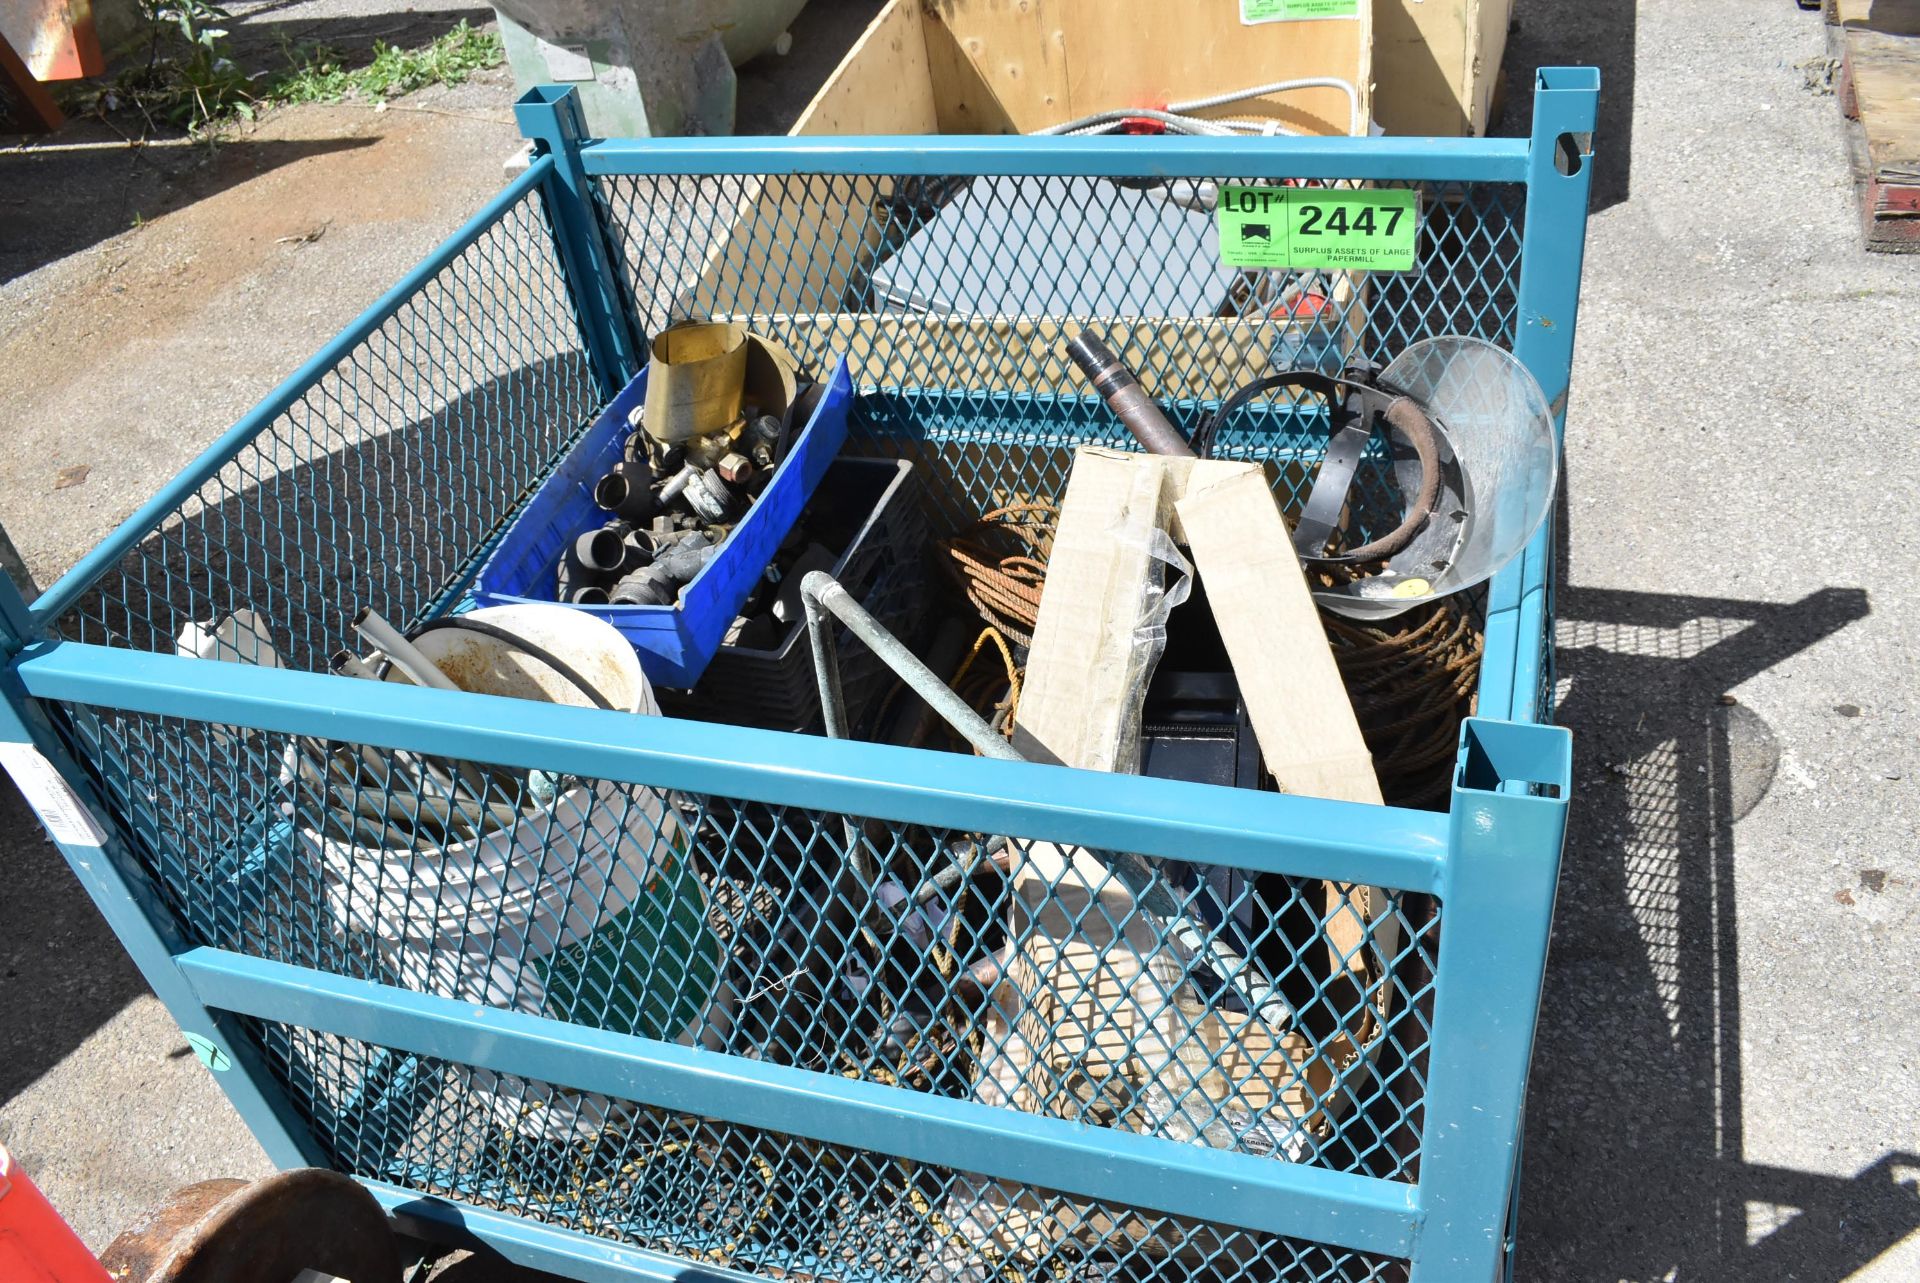 LOT/ PARTS BASKET WITH SHOP SUPPLIES, HARDWARE, FITTINGS, TOOLS [RIGGING FEE FOR LOT #2447 - $25 USD